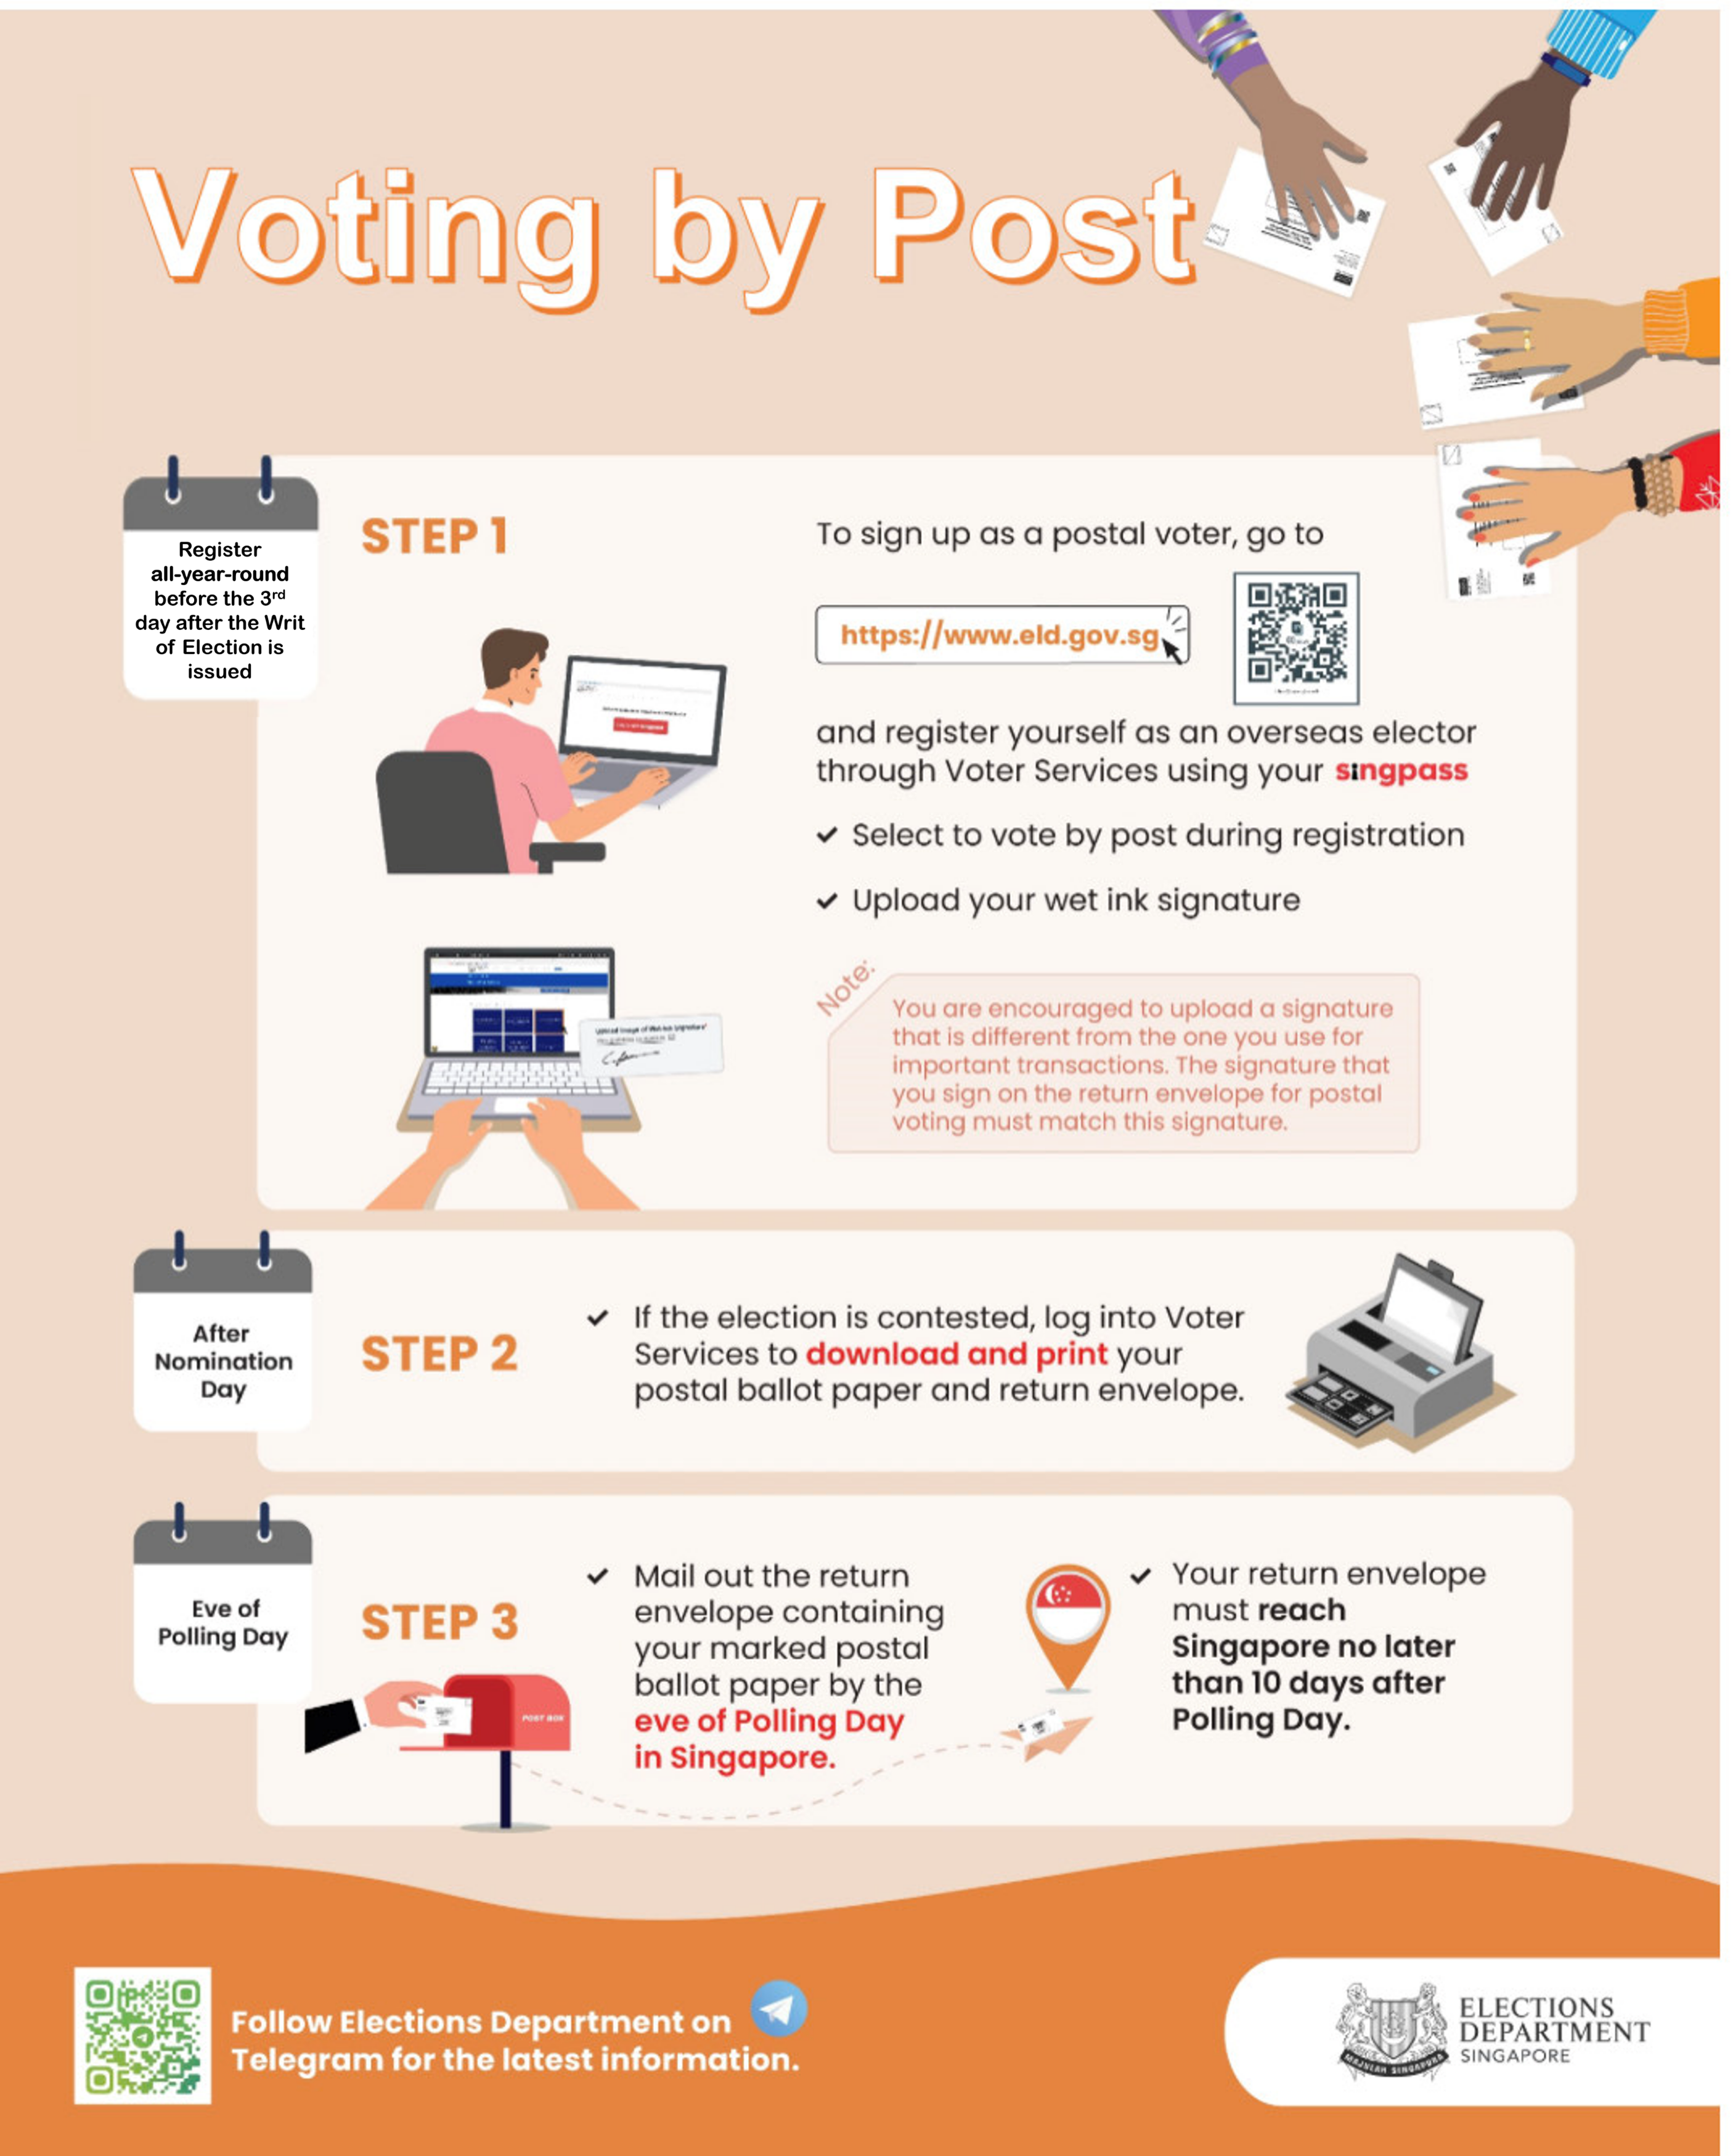 Voting by Post